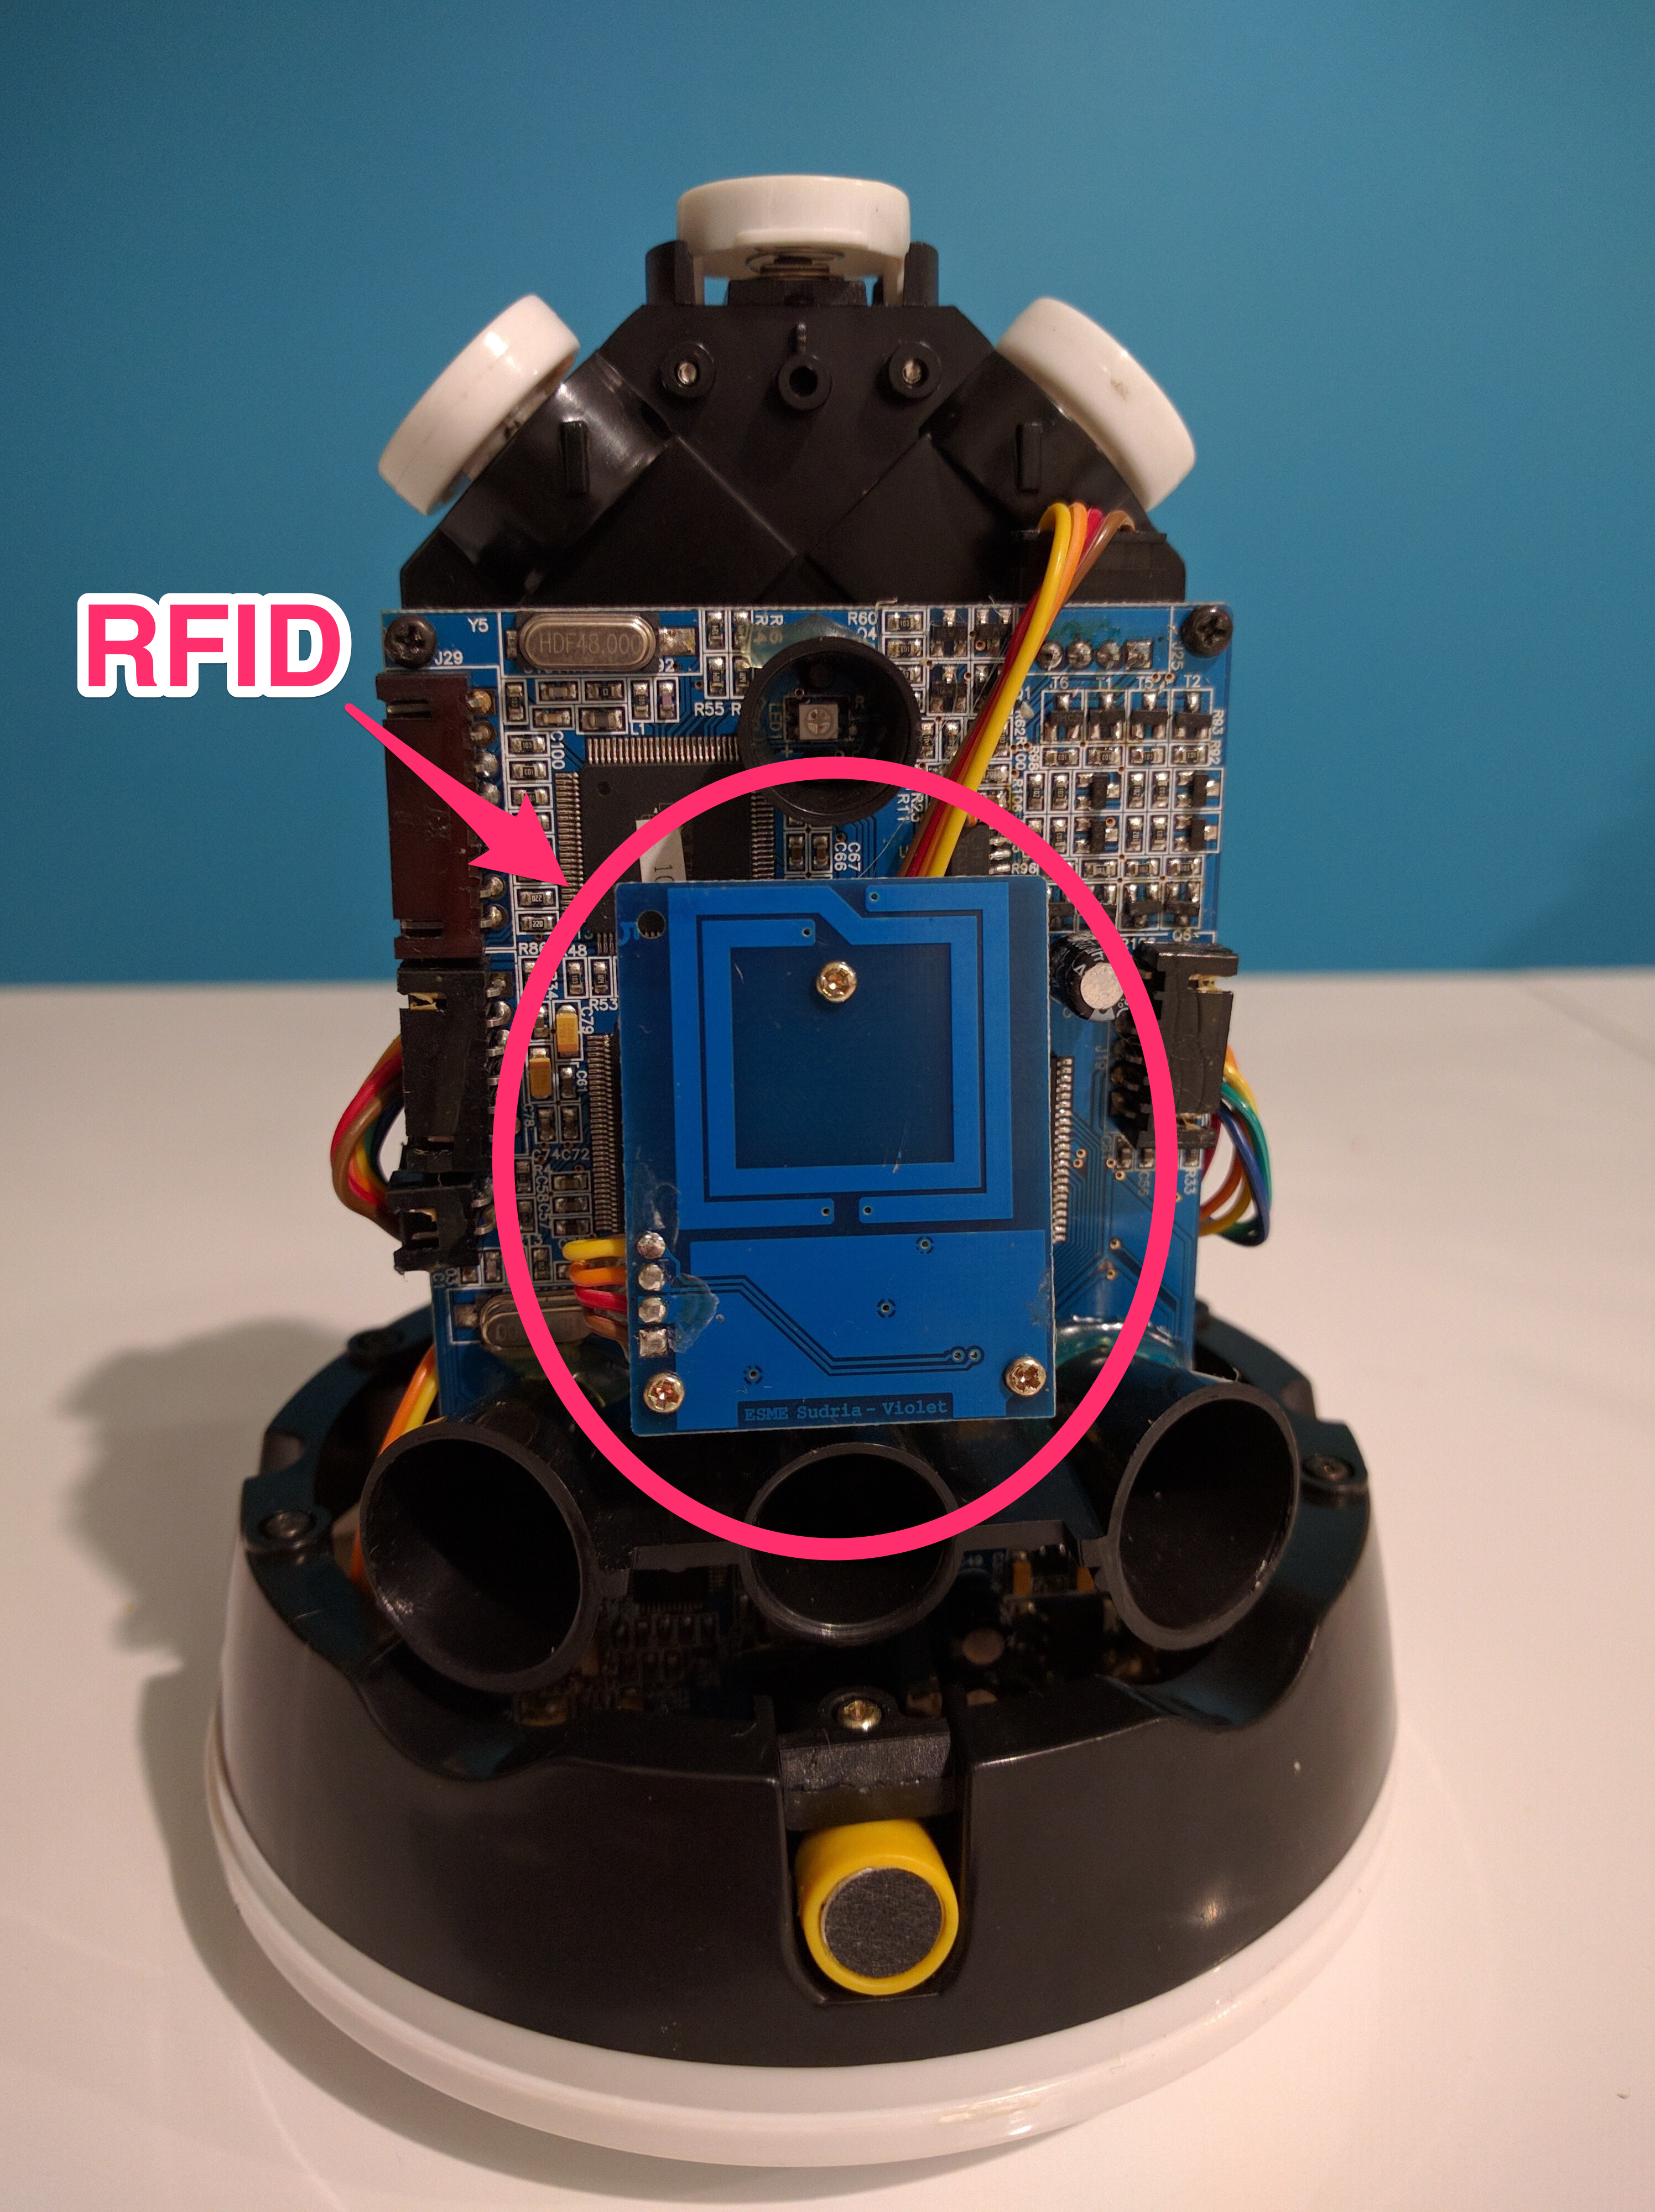 Picture of Nabaztag/tag's RFID reader